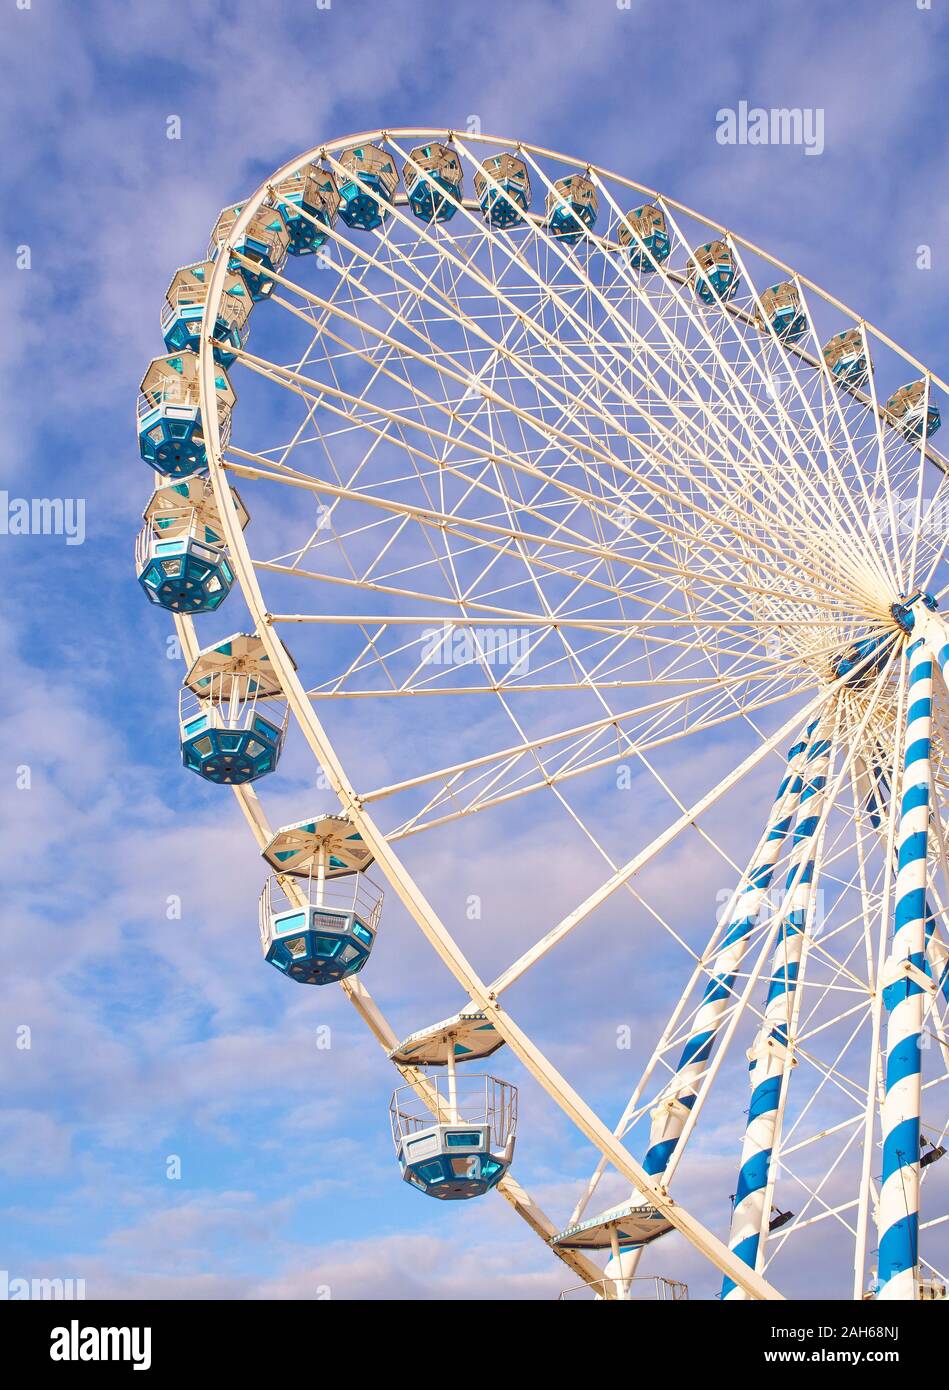 A metallic Ferris wheel with a cloudy sky in the background. Stock Photo